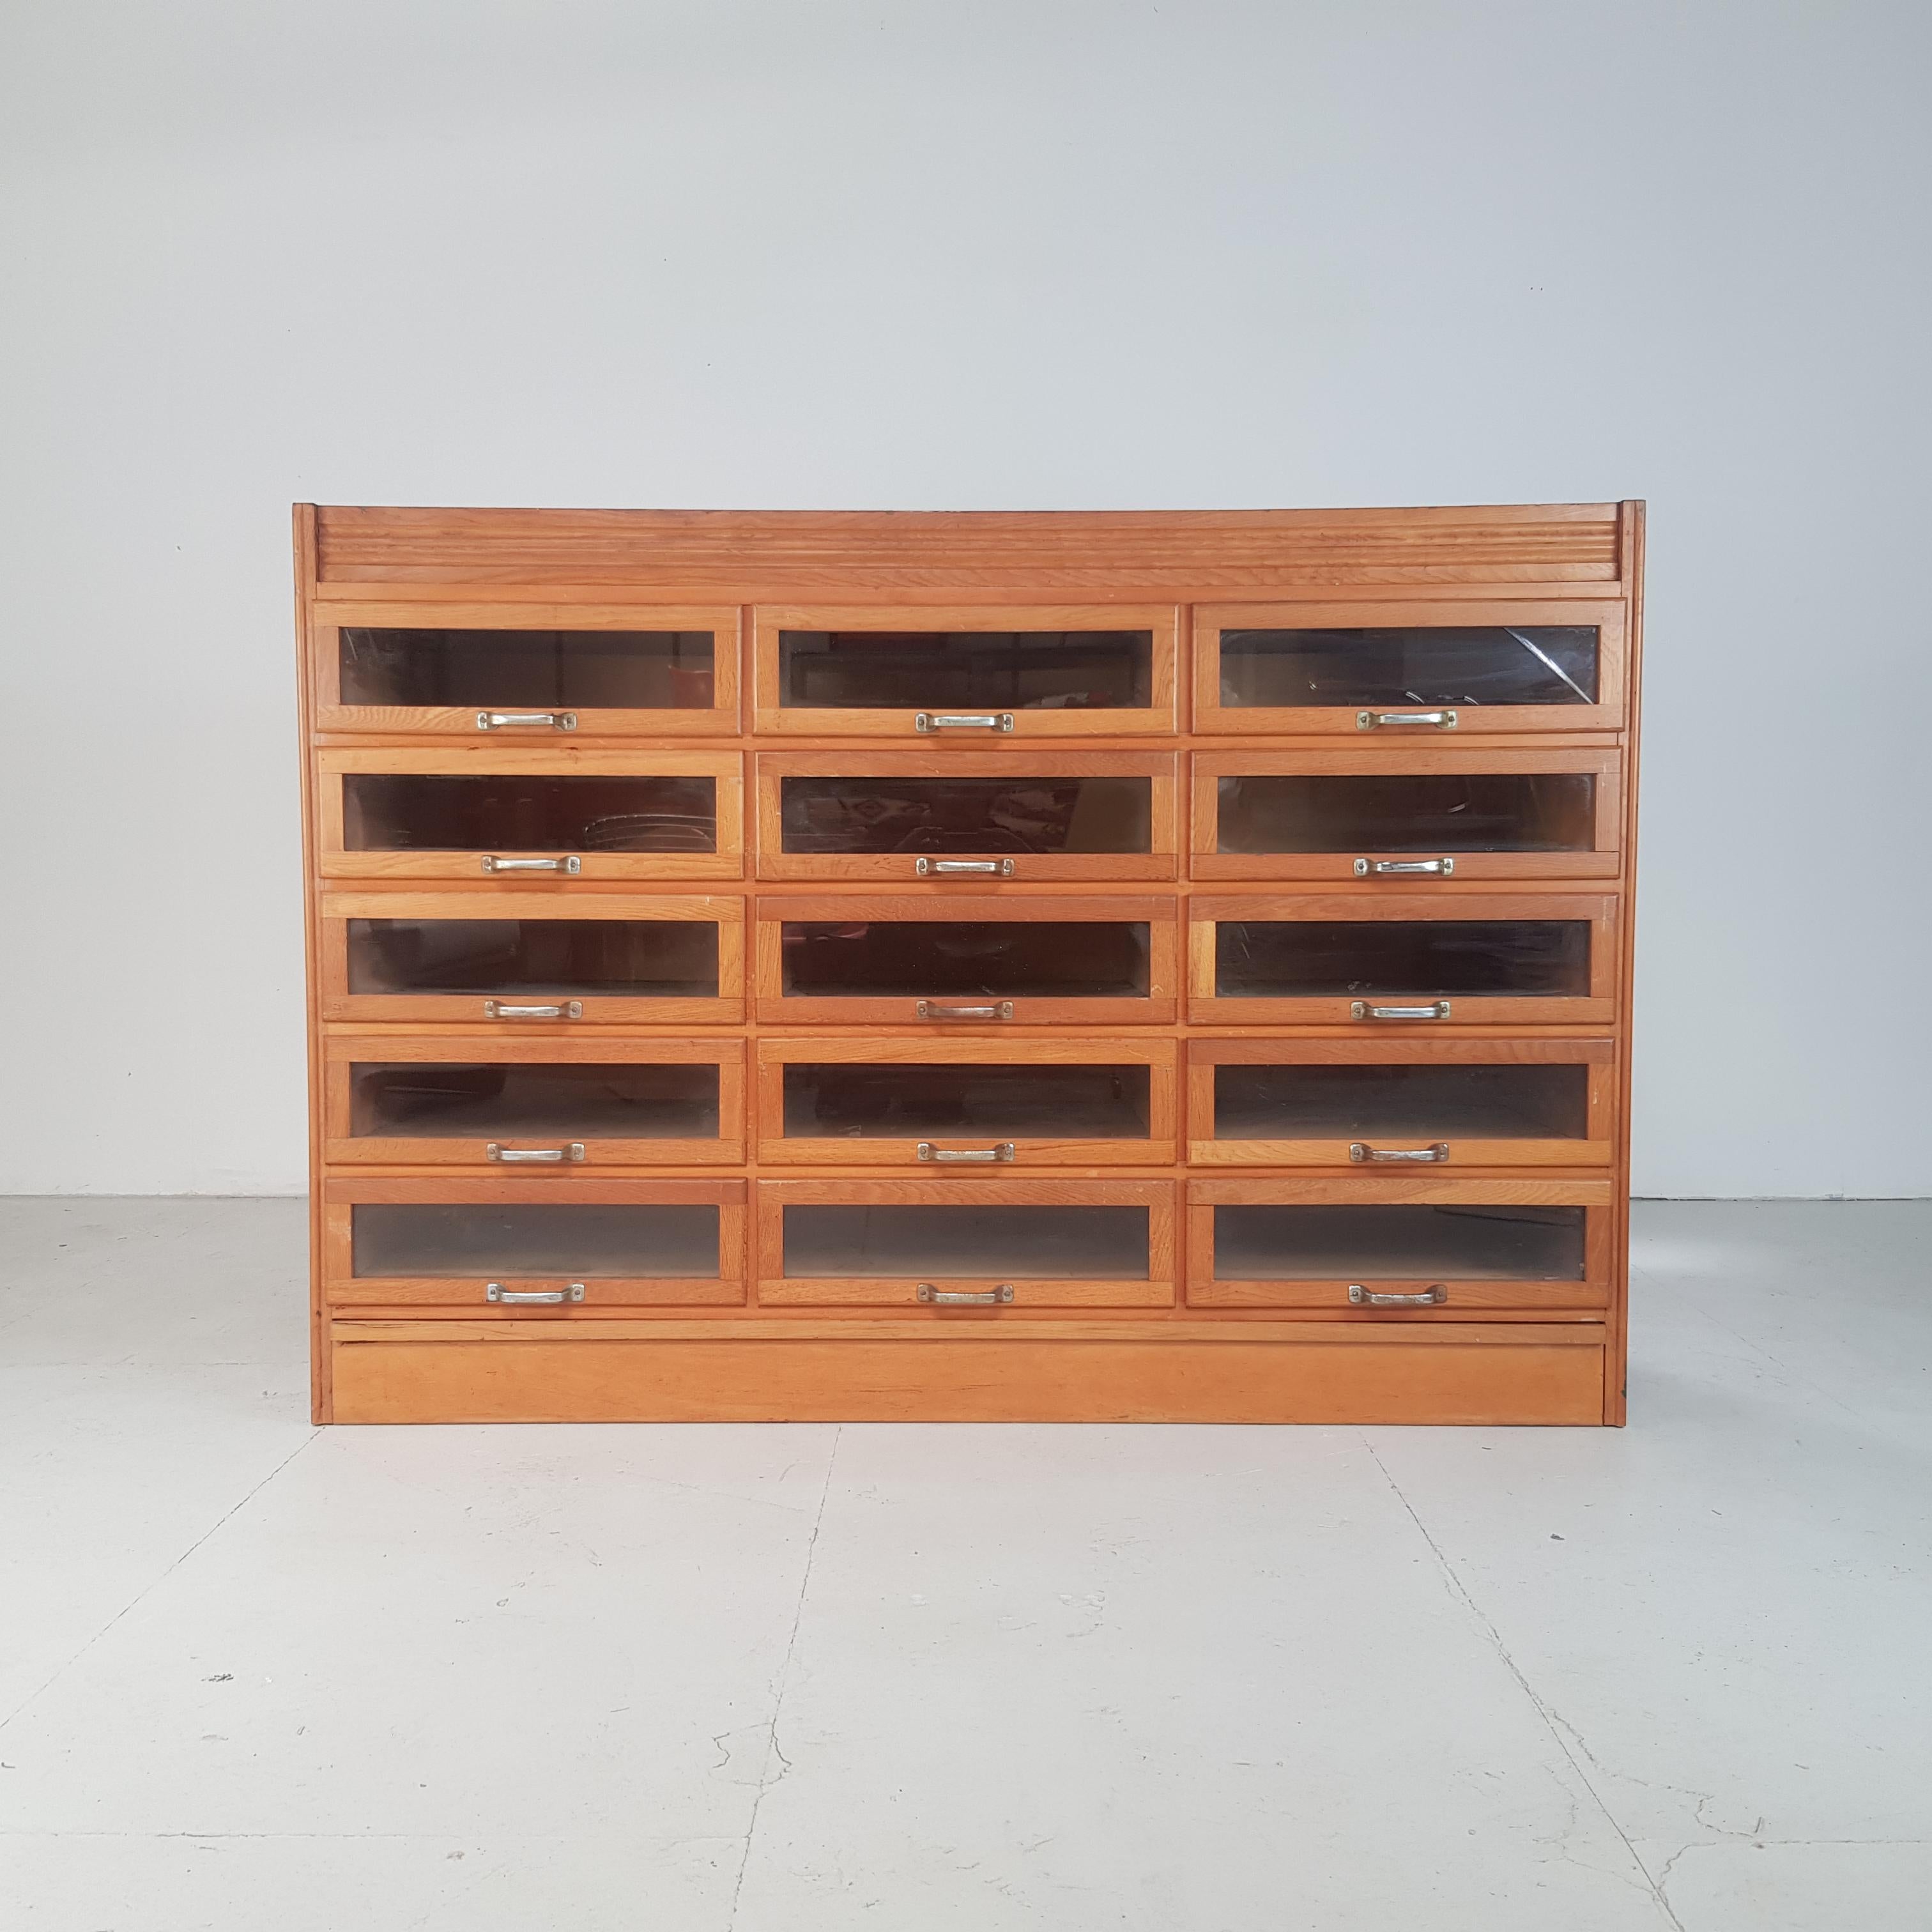 Lovely 15 drawer haberdashery shop cabinet from the 40s/50s.
It has 15 glass fronted drawers, all with original metal D handles.

Approximate dimensions:

Width: 153cm

Depth: 55cm

Height: 106cm

Drawers: 45cm x 43cm x 13cm.

Overall,